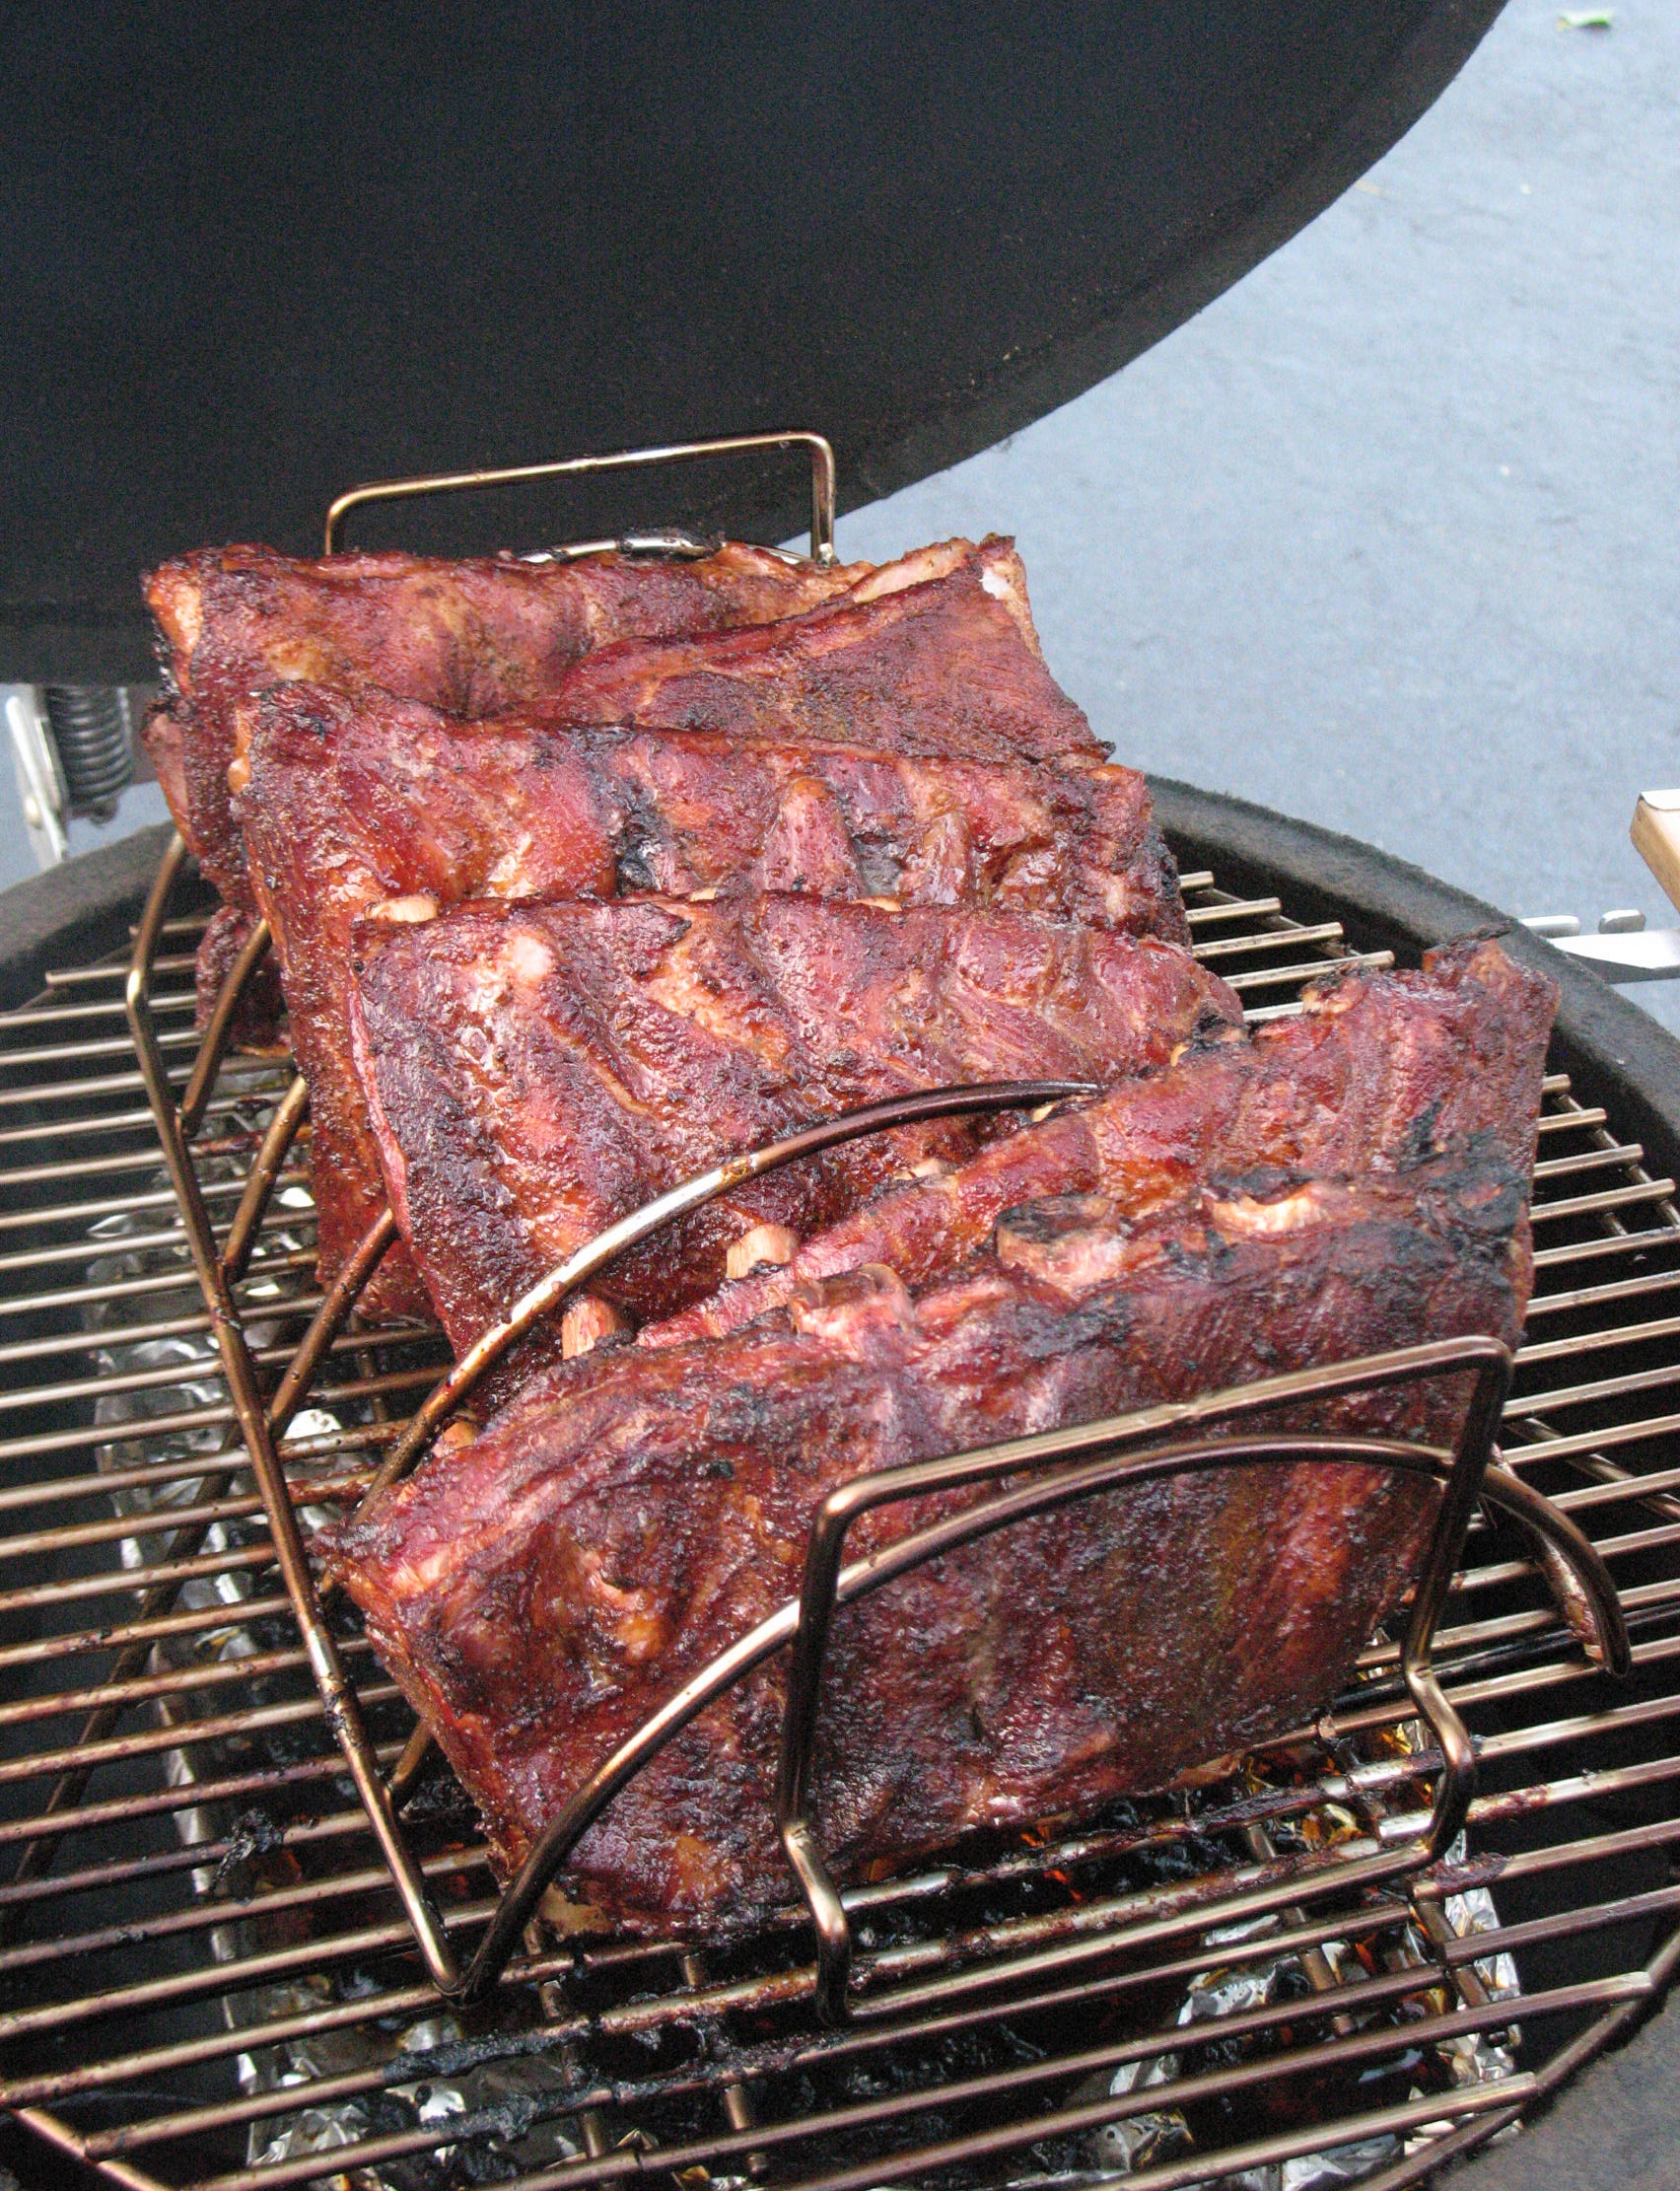 How To Smoke Baby Back Ribs On Your Kamado Grill Saffire Grills,Mimosa Recipes Easy